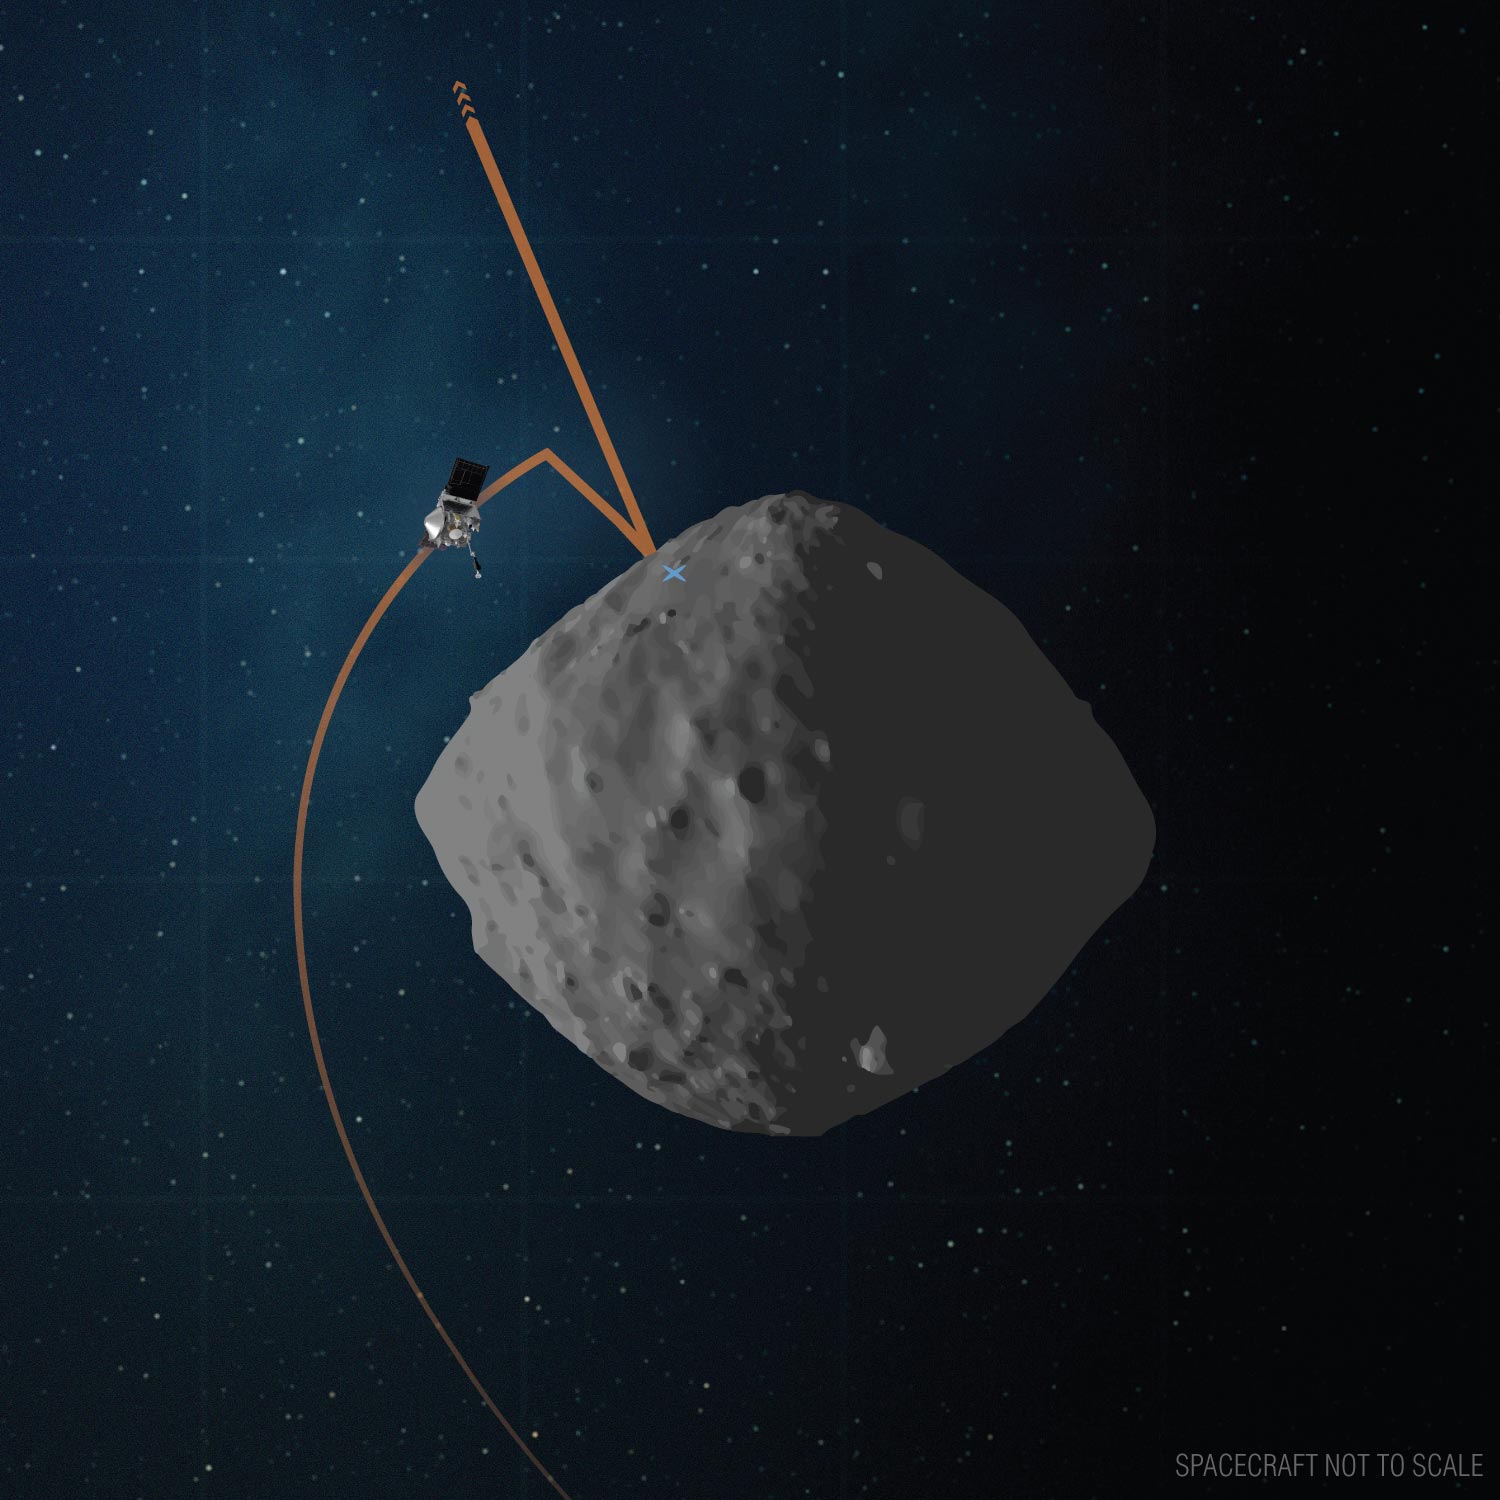 NASA finds asteroid Bennu ‘aged early’ by Sun